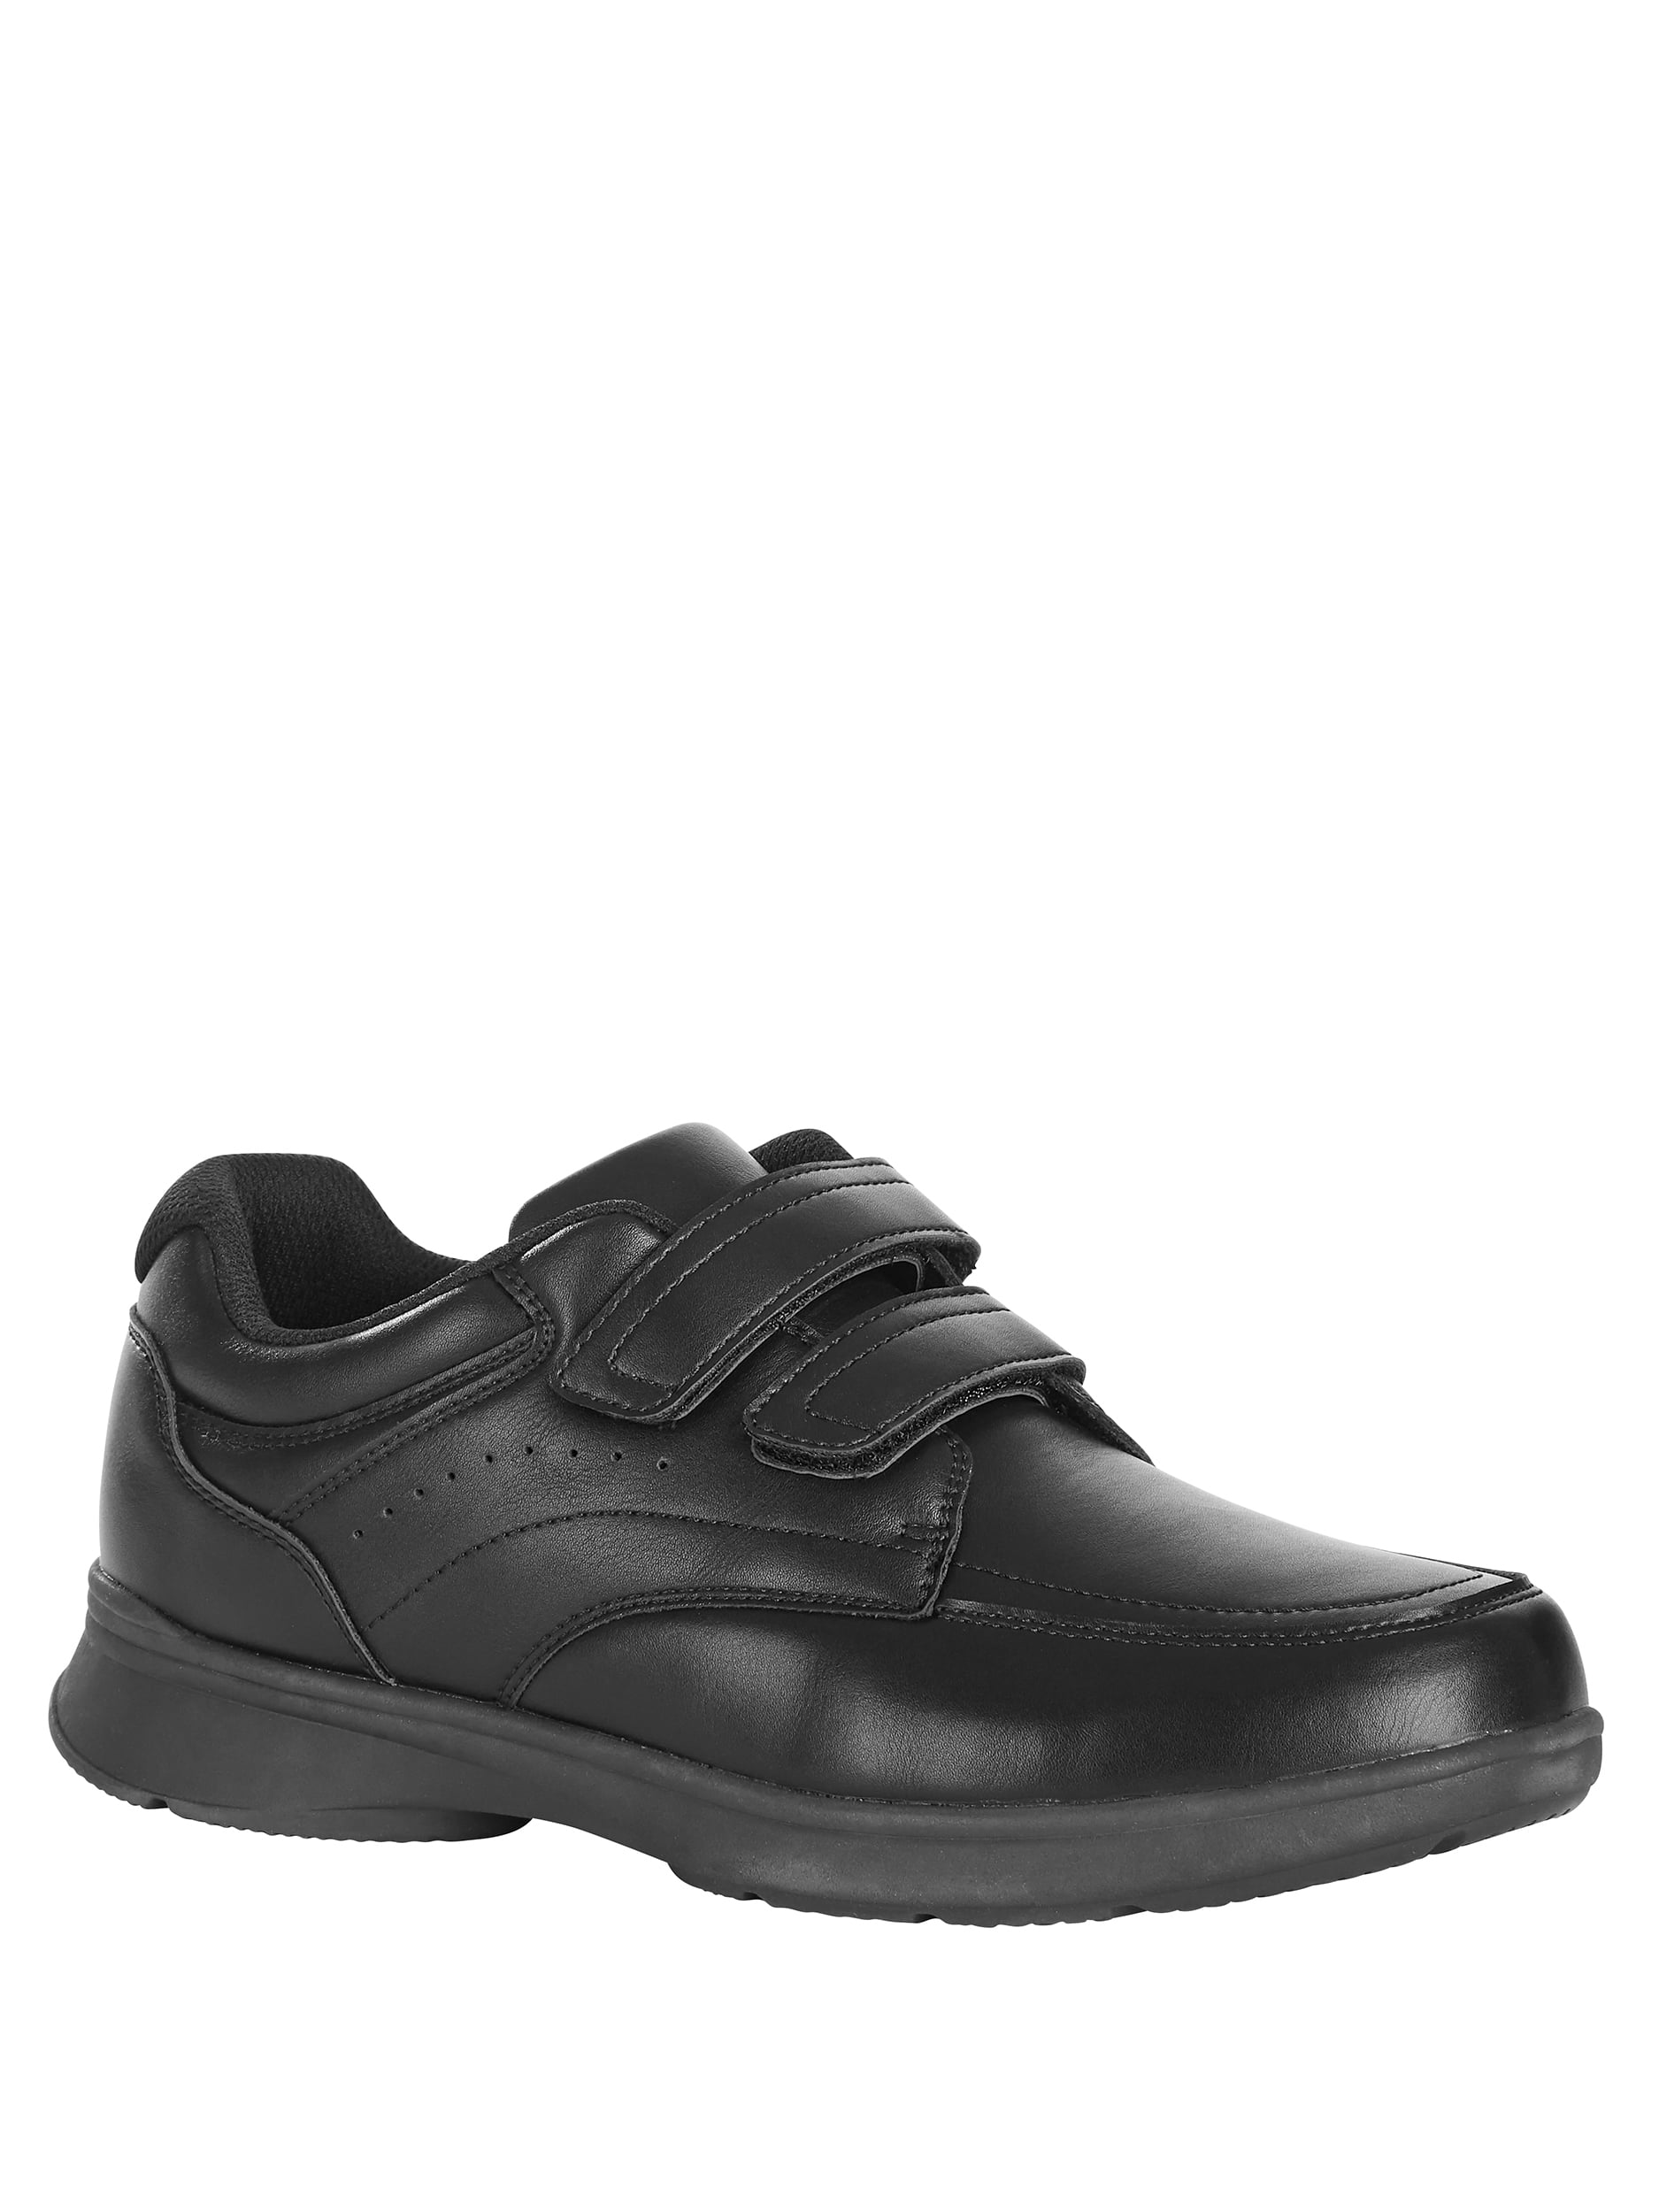 George Men's Mike Comfort Shoes 